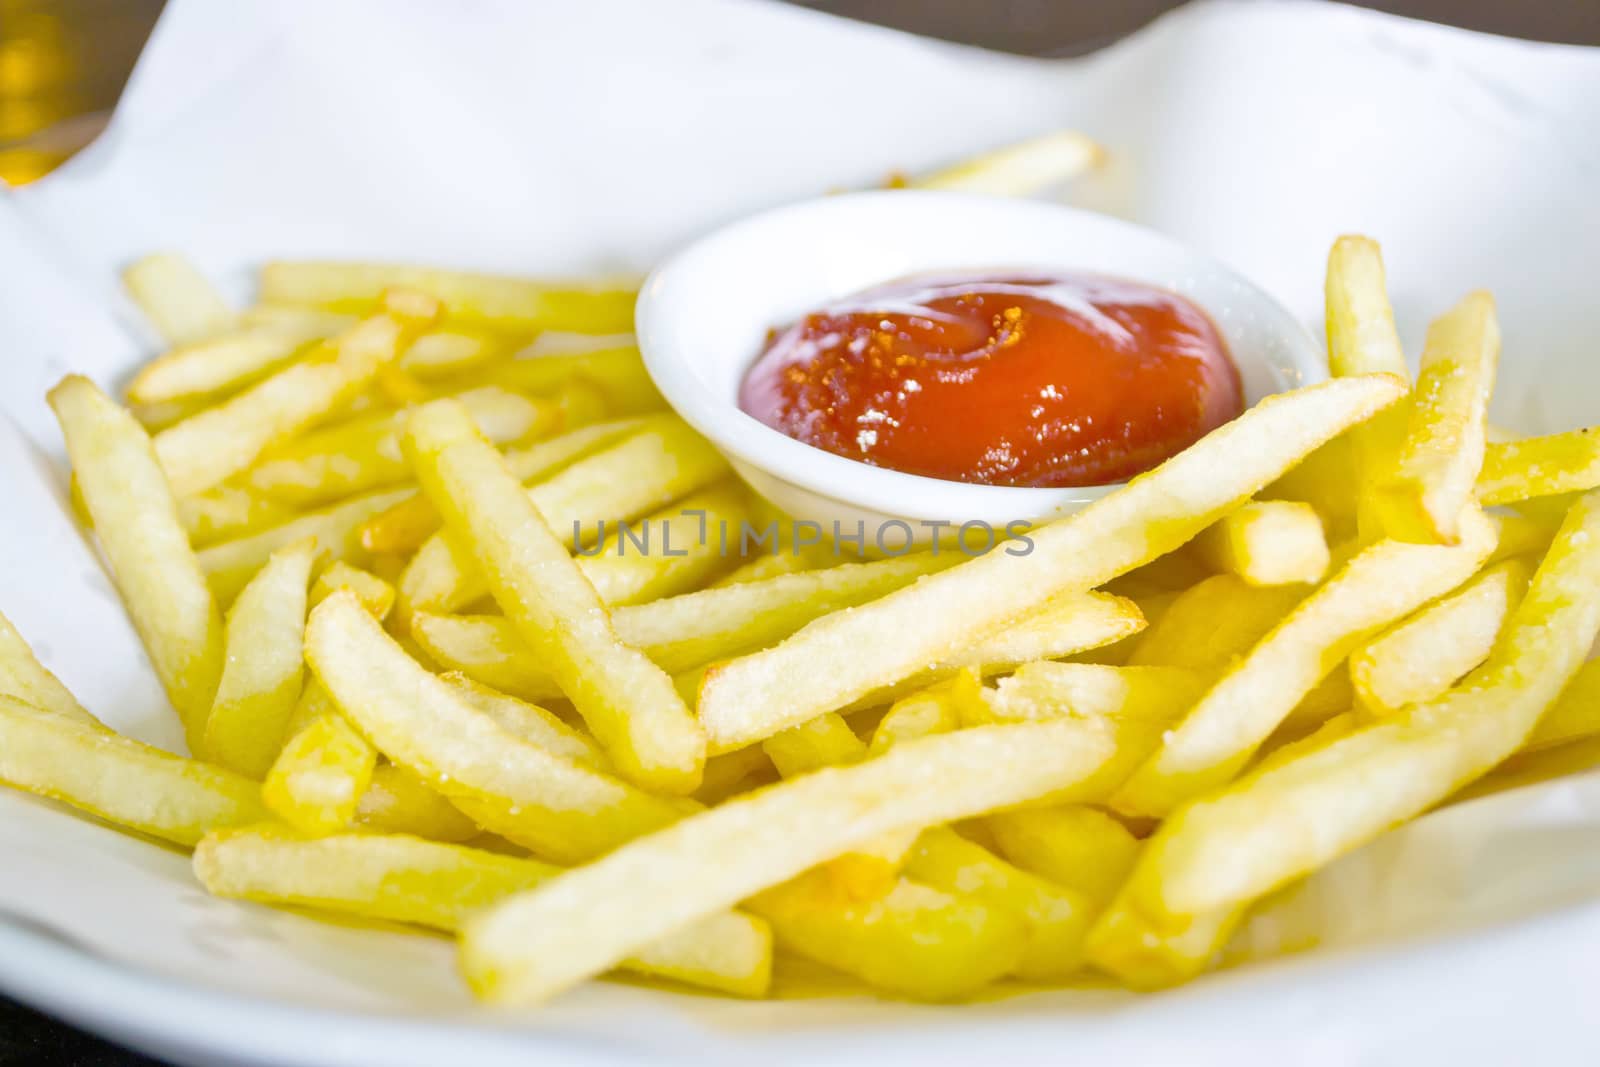 French fries and ketchup on the plate by Thanamat